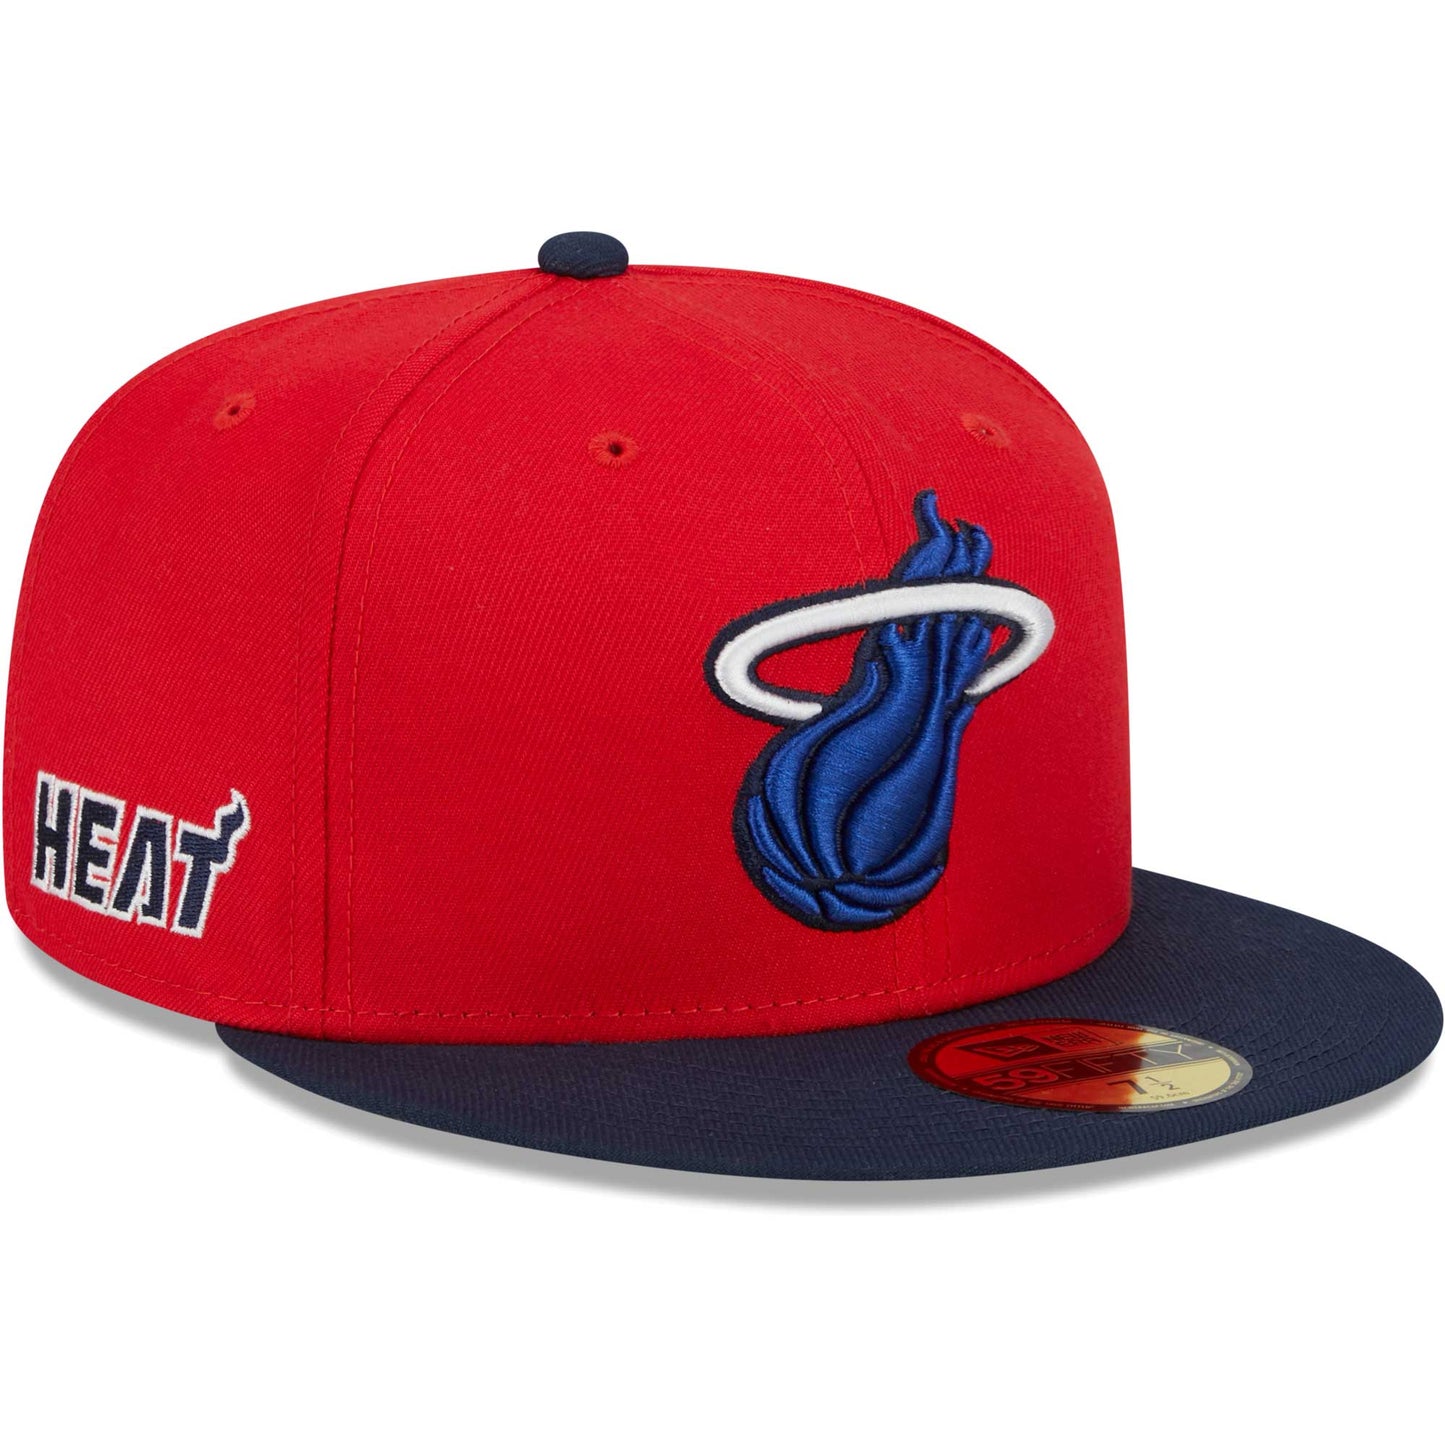 Miami Heat New Era 59FIFTY Fitted Hat - Red/Navy